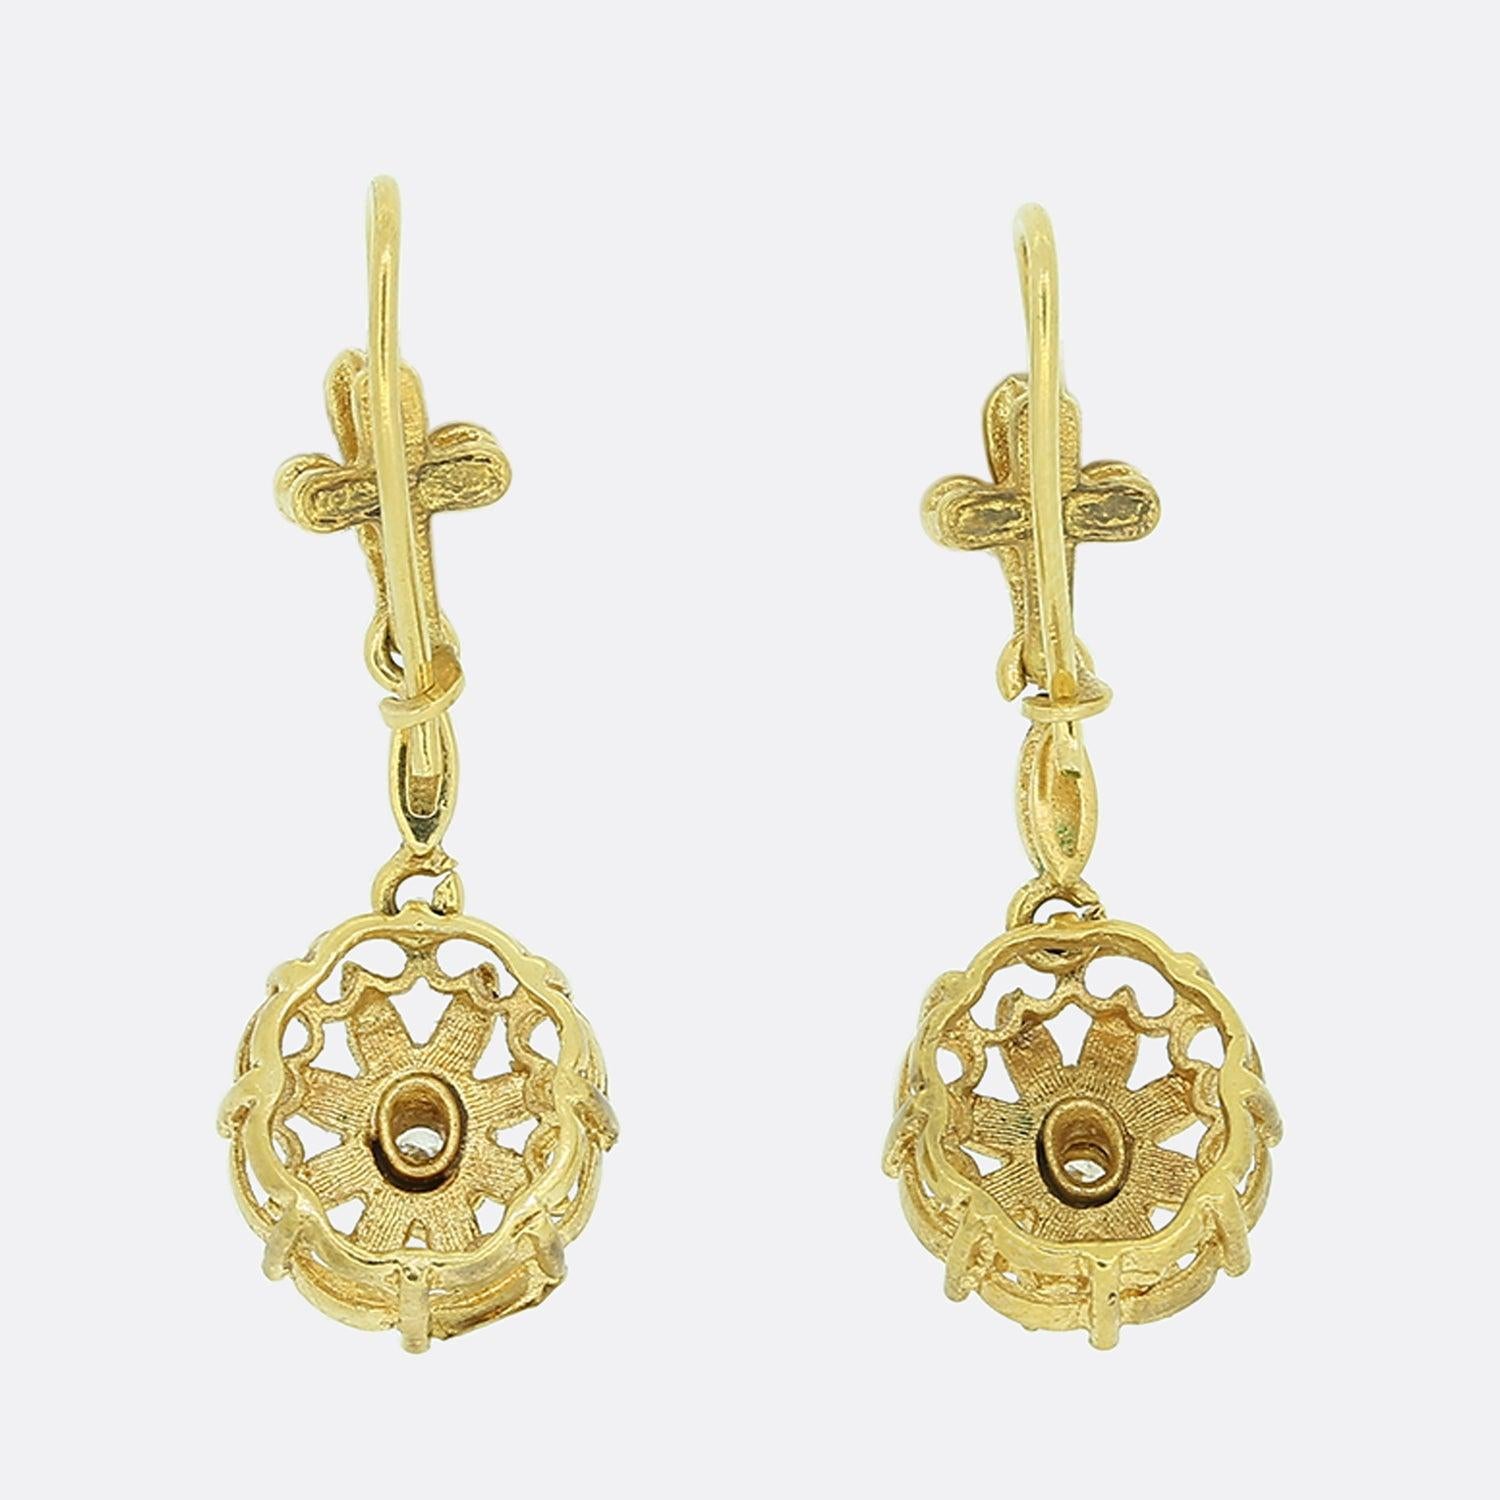 This is an exquisite pair of Vintage diamond drop earrings. Each earring is set with a brilliant cut diamond in an 18ct yellow gold drop setting with a floral motif. The earrings also feature secure French wire and hook fittings. 

Condition: Used